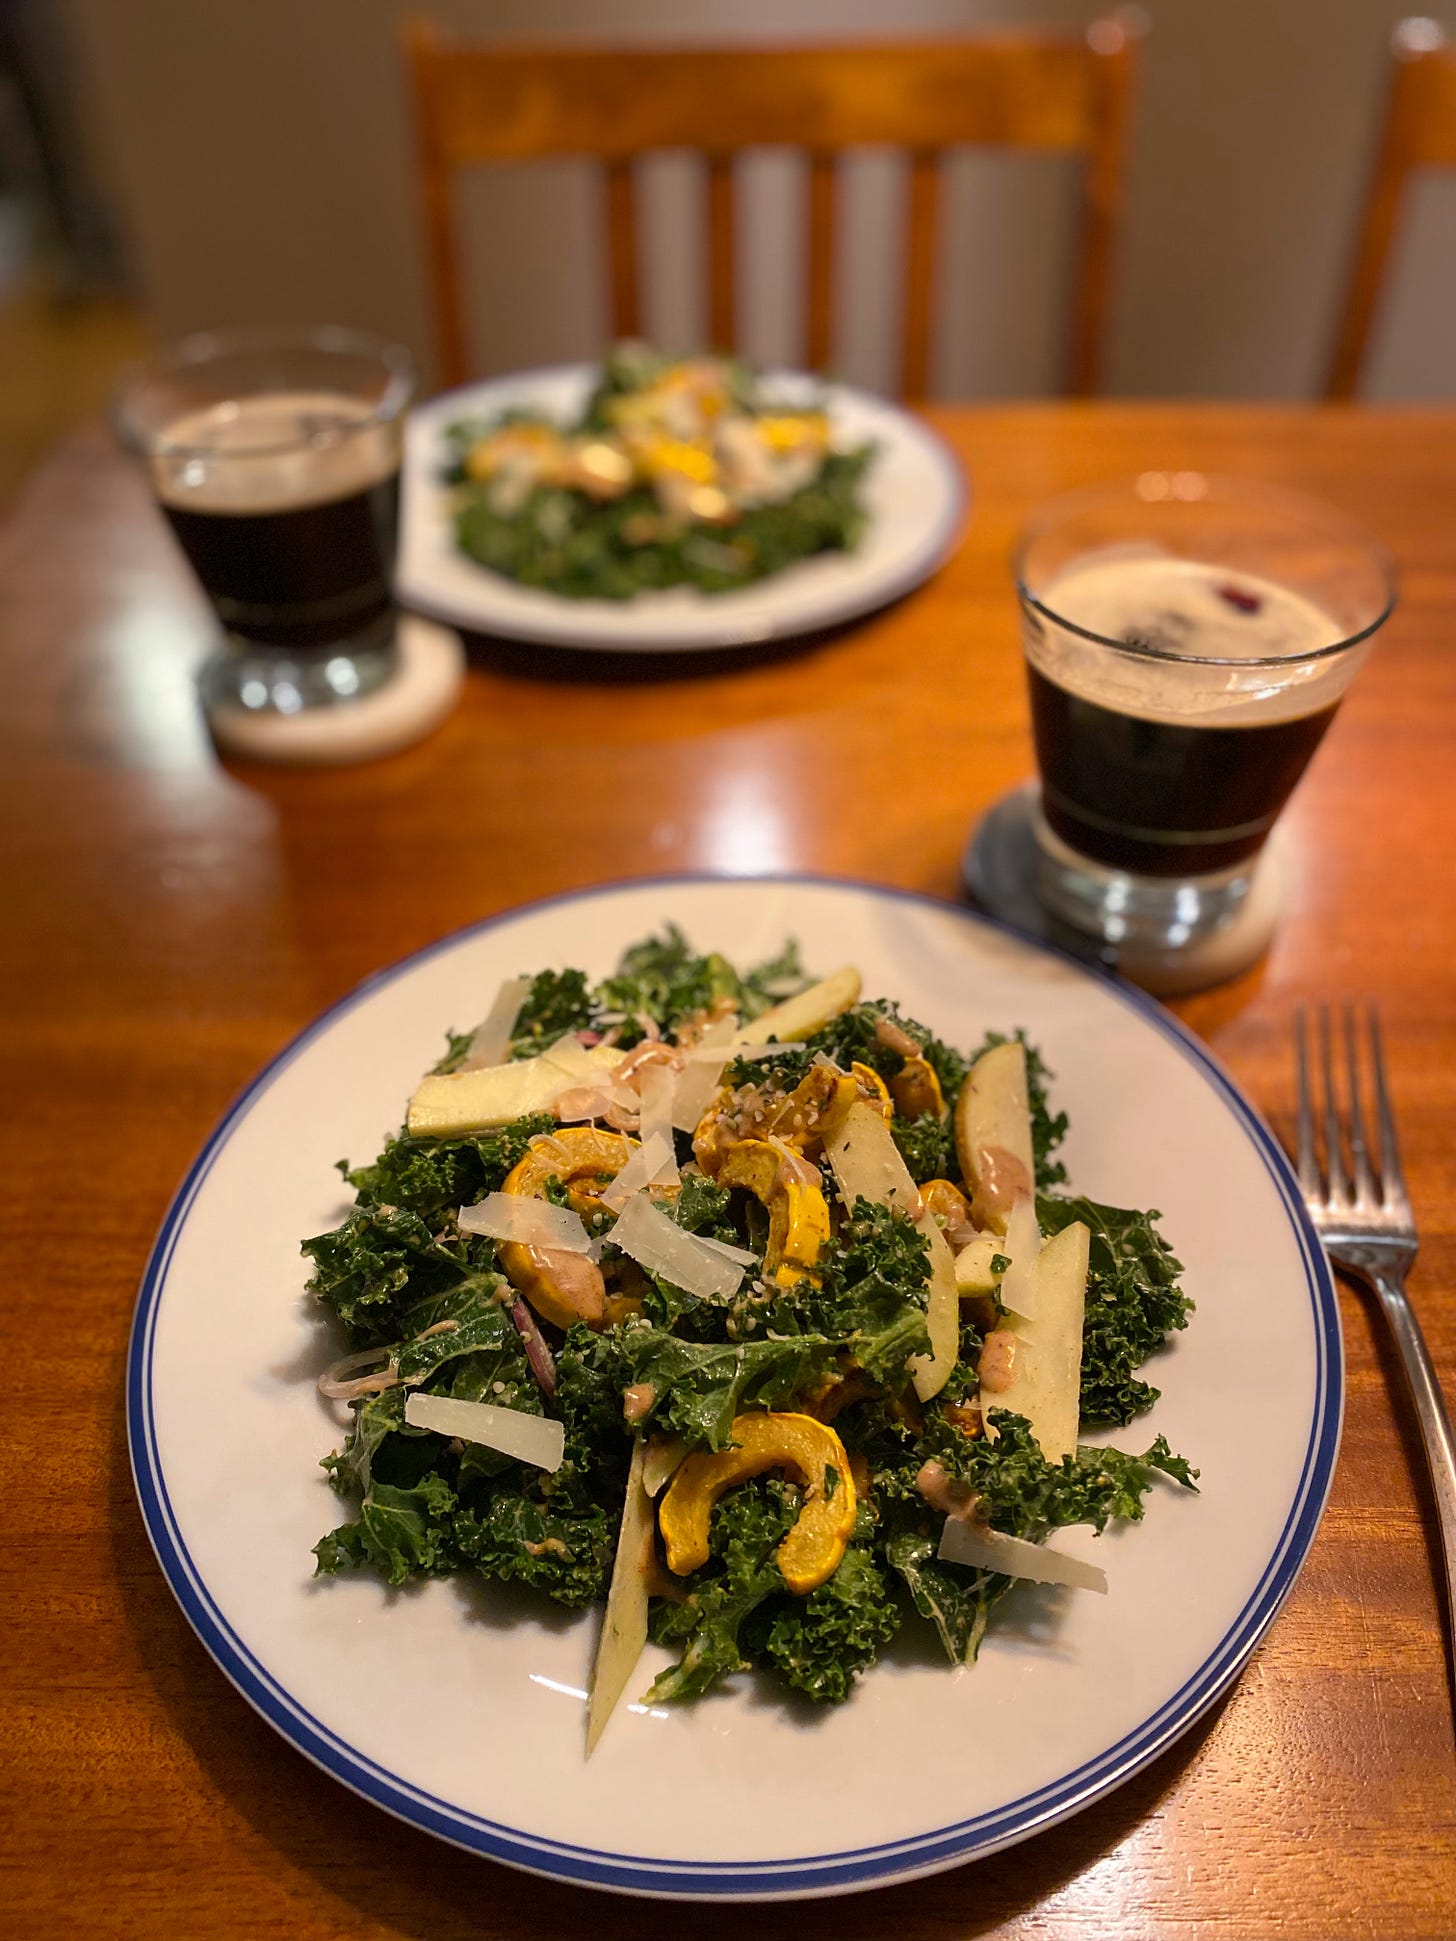 Two plates of kale salad across from each other on the table, each with a glass of dark beer on a coaster beside it. The salad has slices of apple and roasted delicata squash, and pieces of pecorino and hemp seeds scattered overtop.